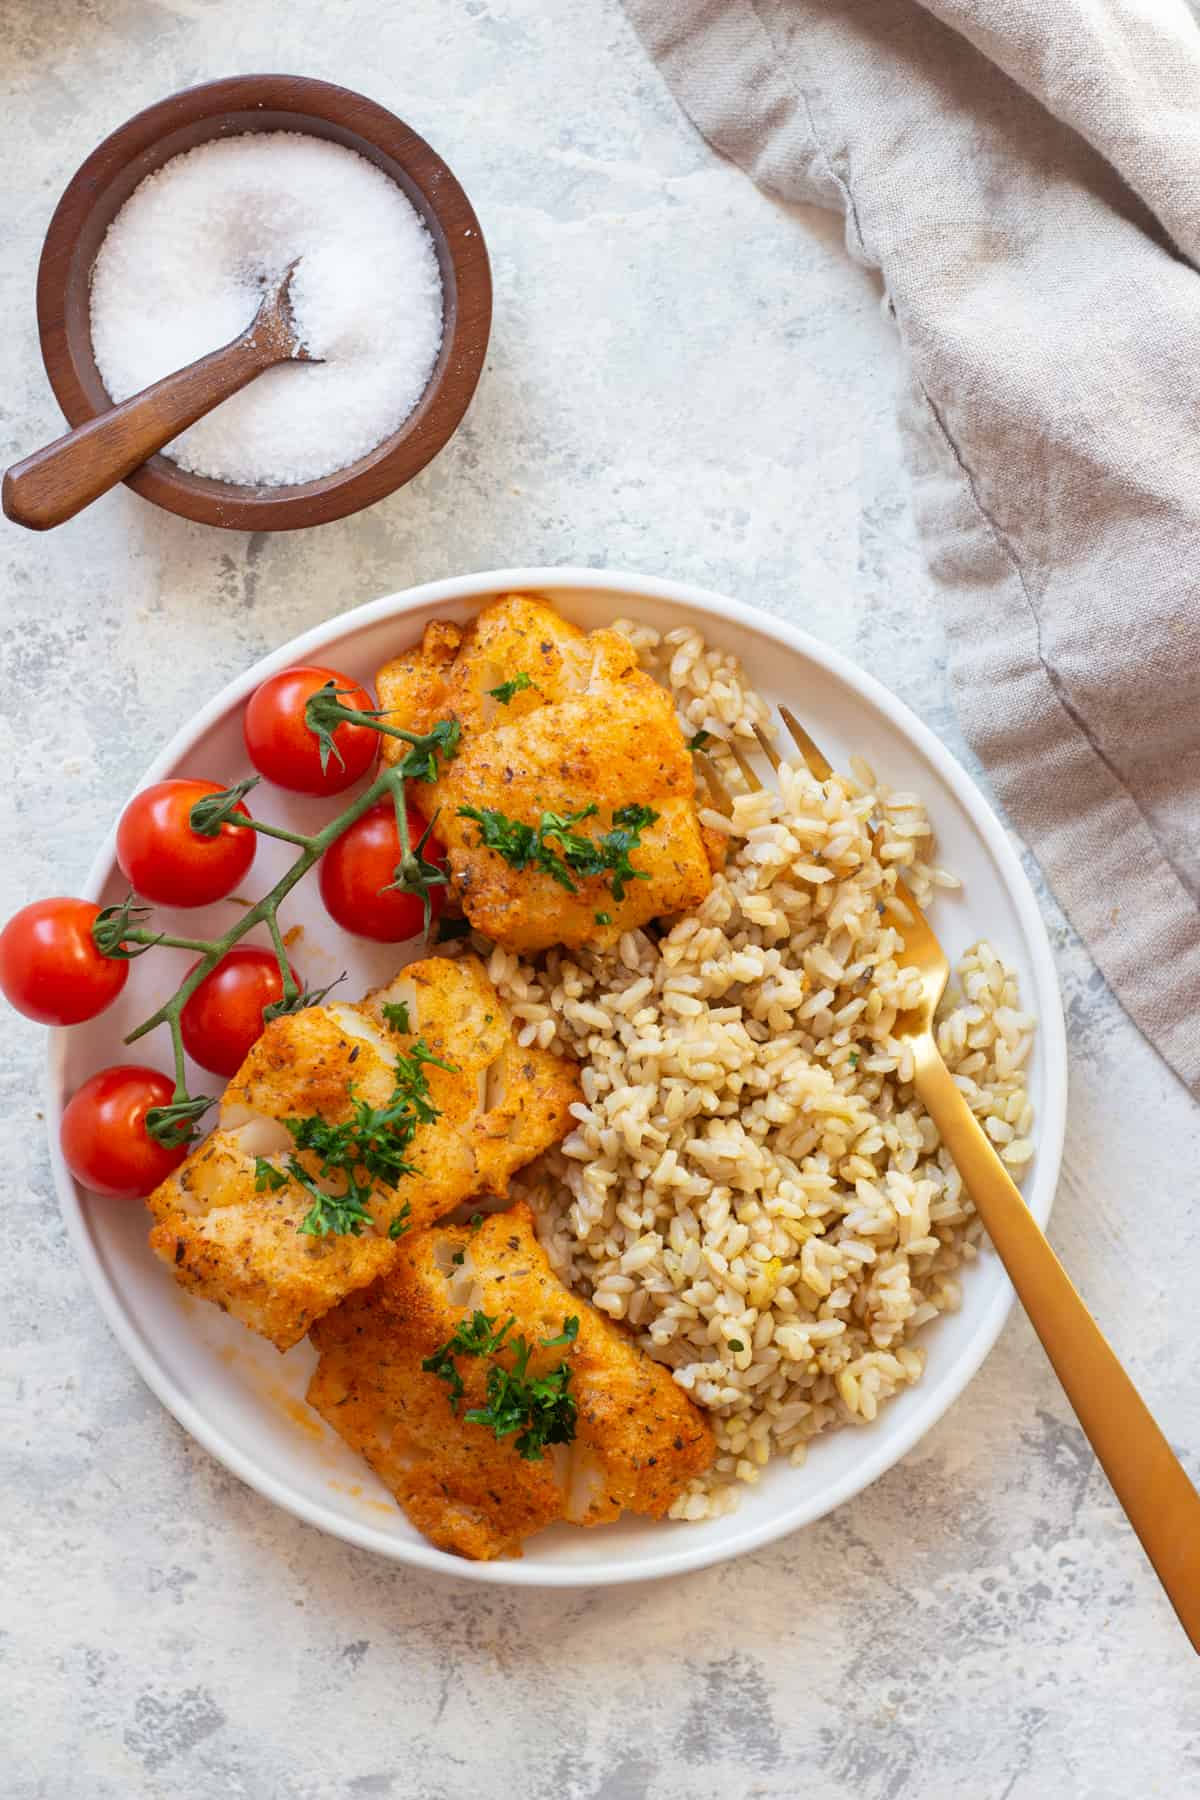 A plate of baked cod with rice makes a healthy dinner that you can make in less than 30 minutes